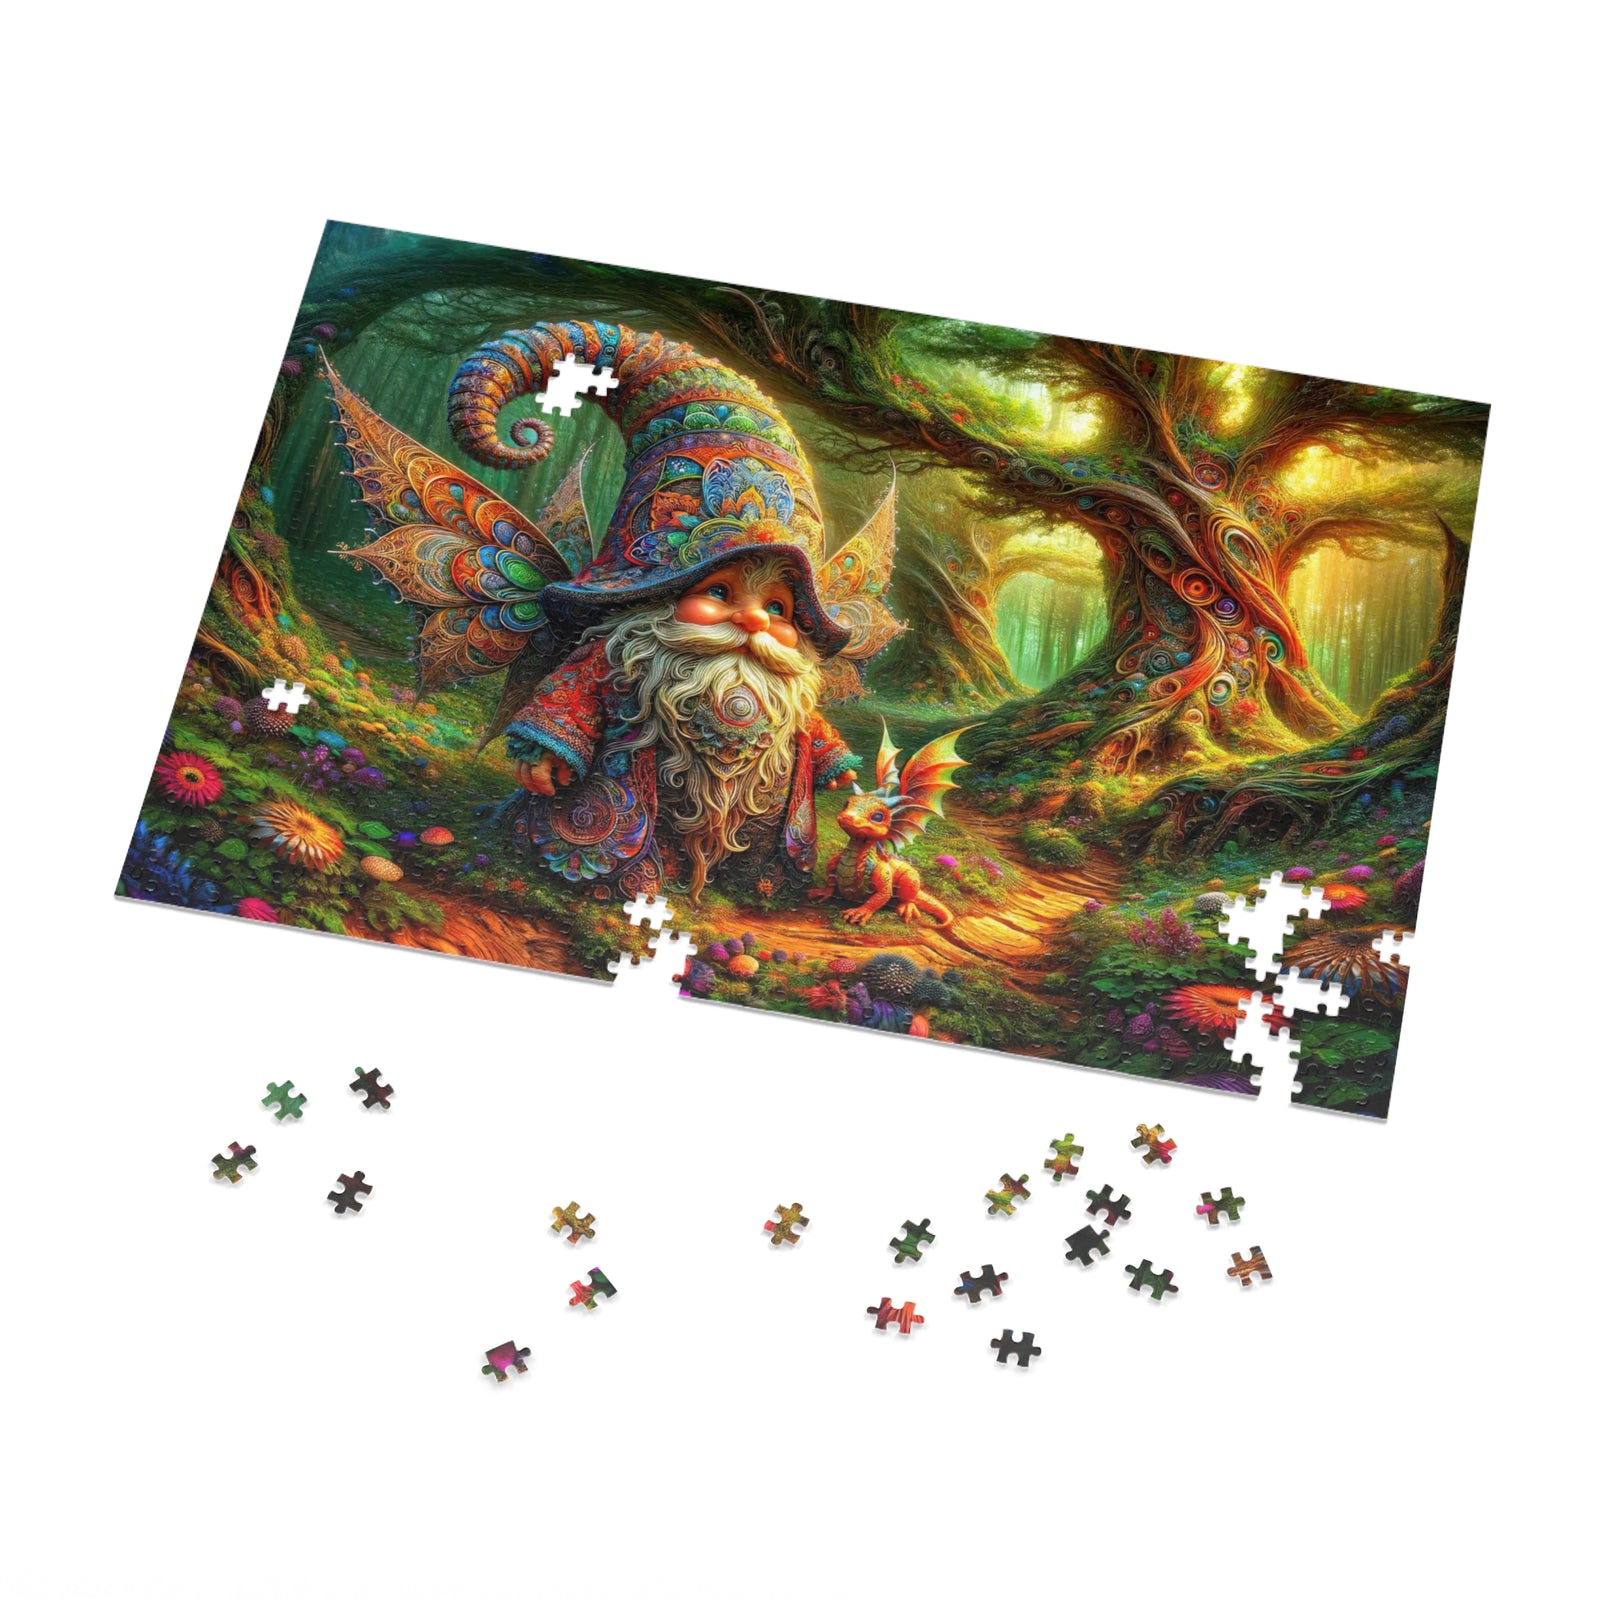 The Gnome's Enchanted Rendezvous Jigsaw Puzzle